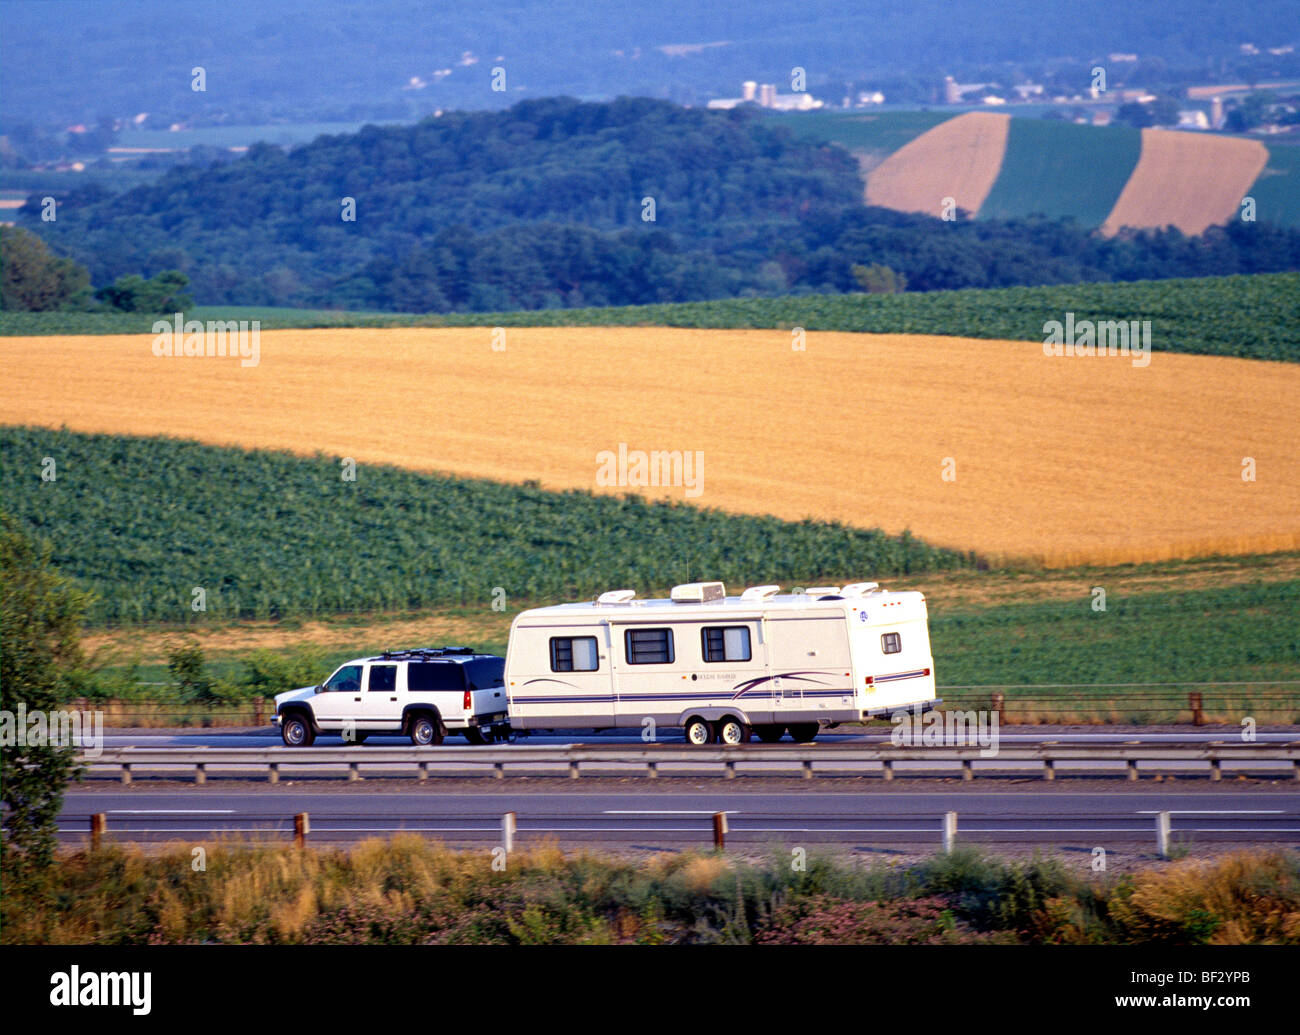 Chevy Suburban towing a trailer in Colorado on the Interstate Highway Stock Photo